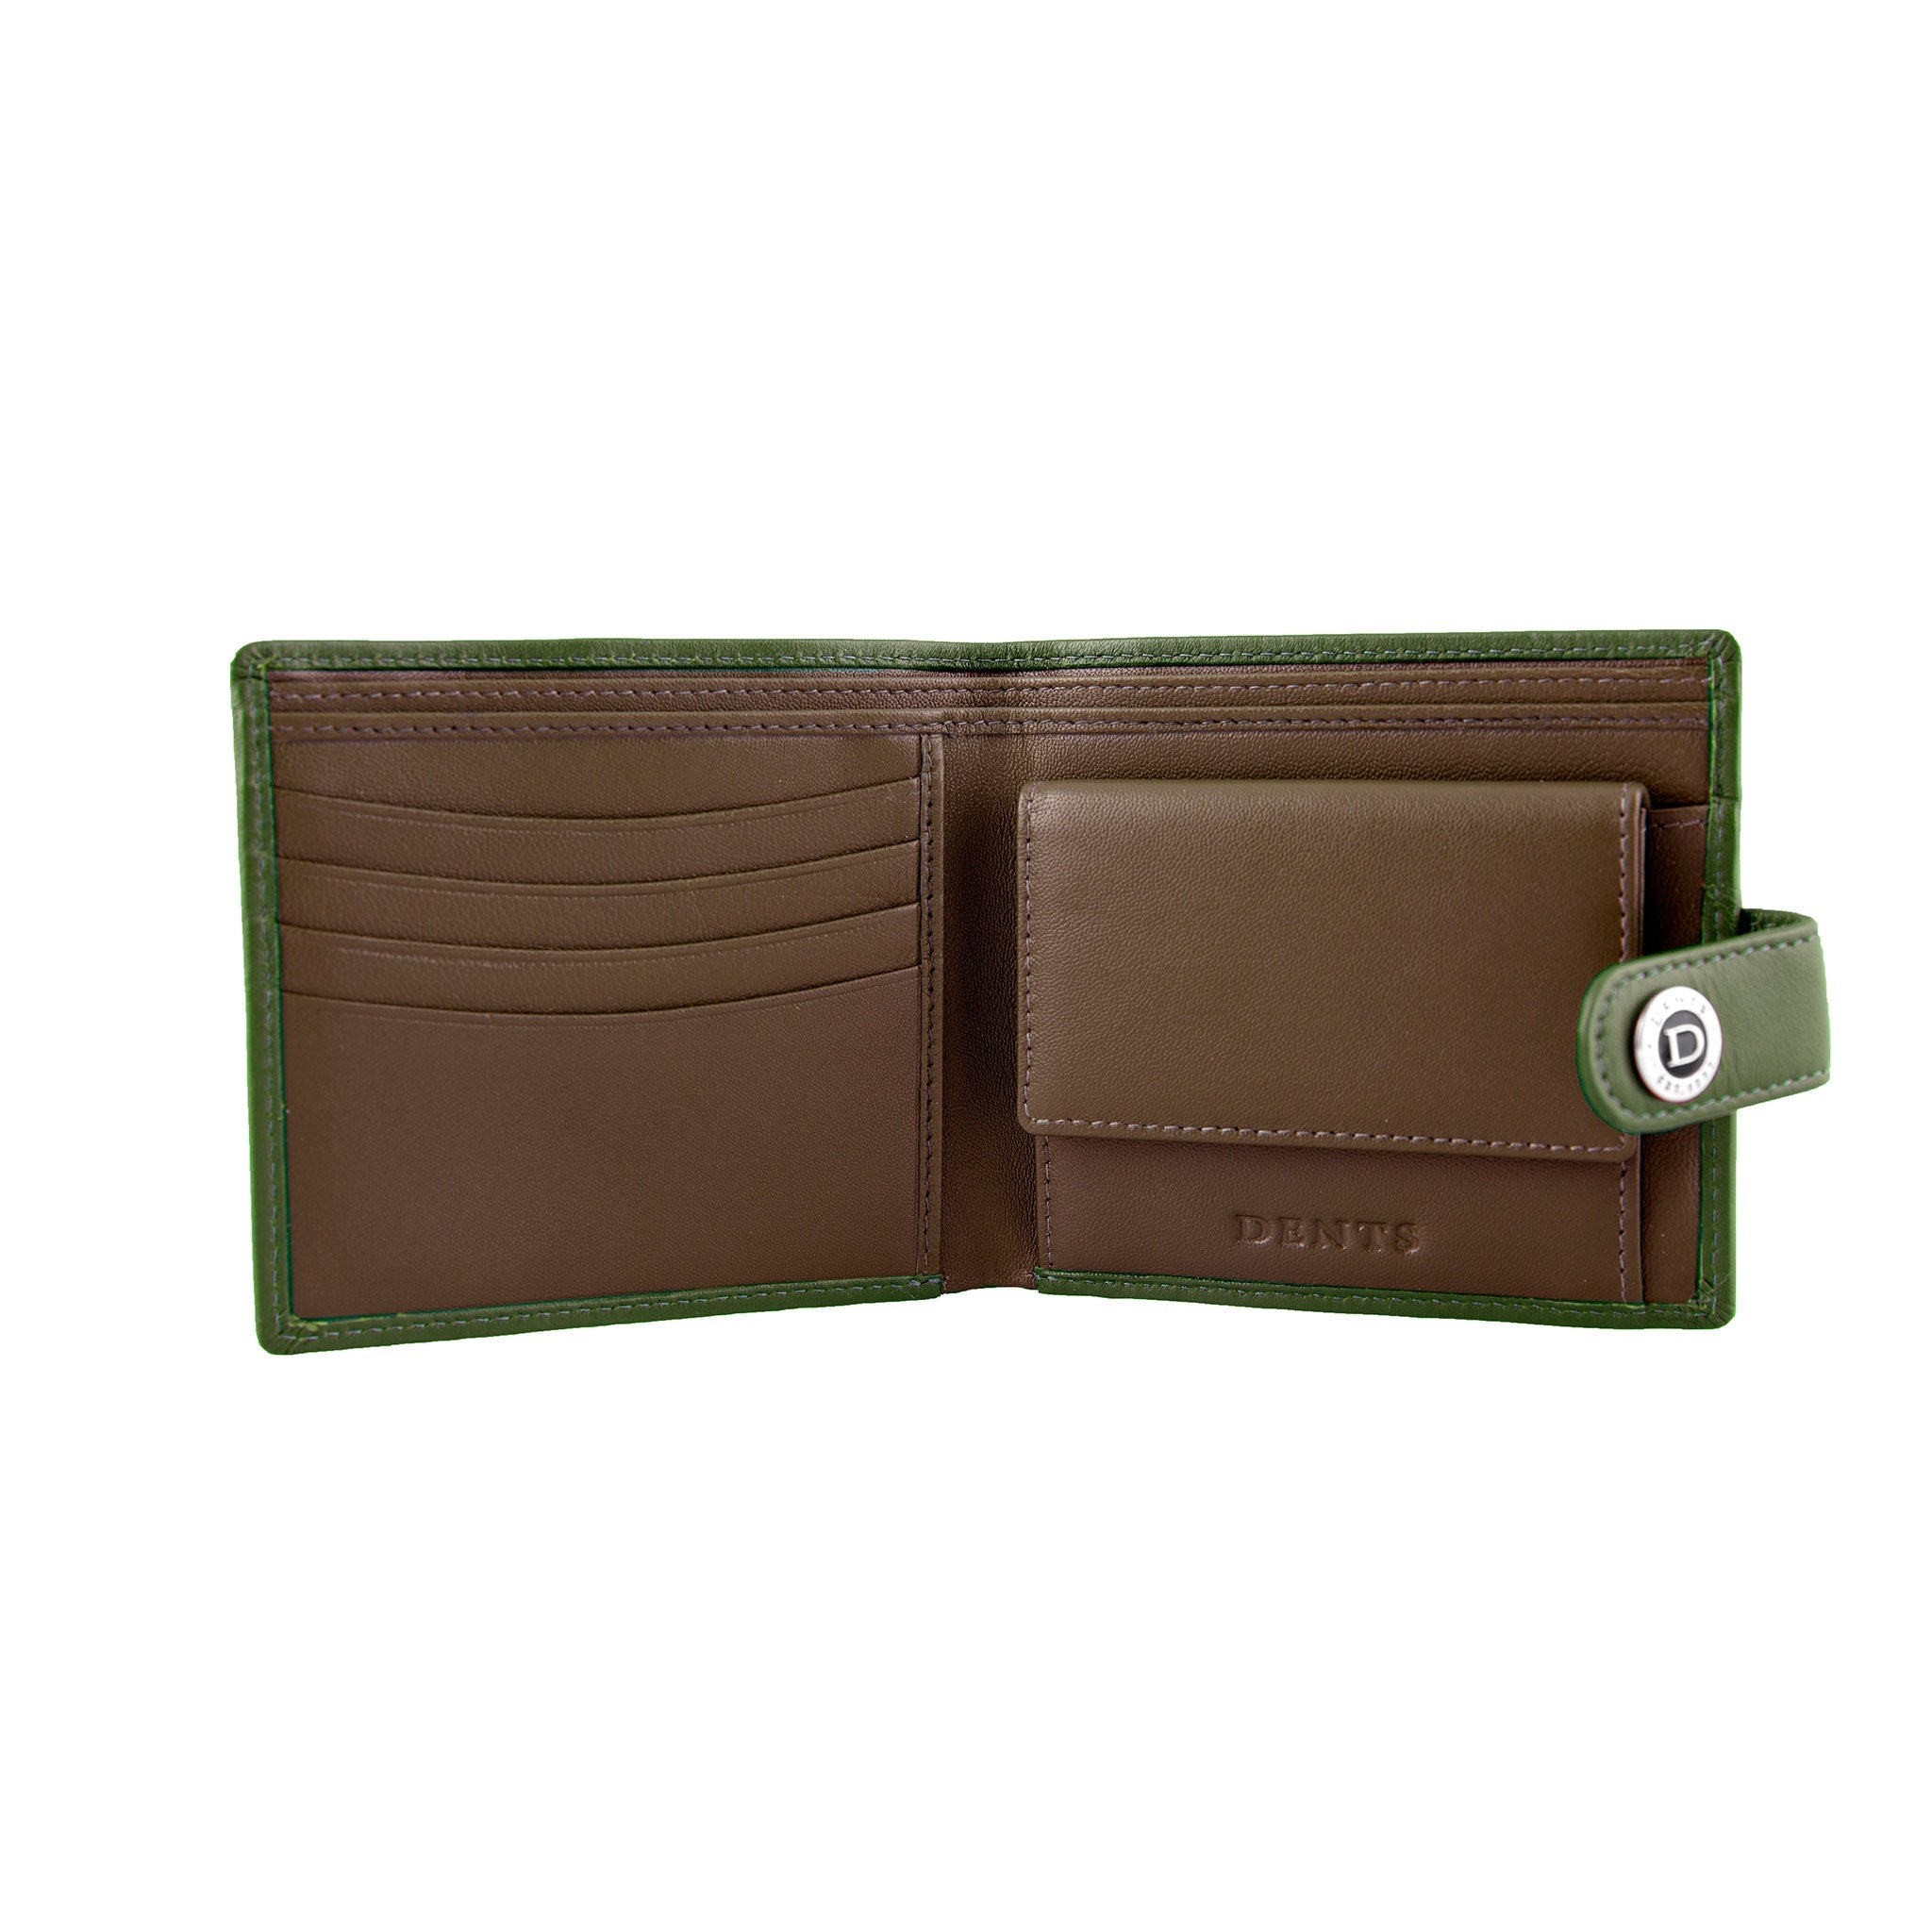 Wallet for bills and coins, Genuine Cow Leather wallet in green and camel,  handcrafted wallet